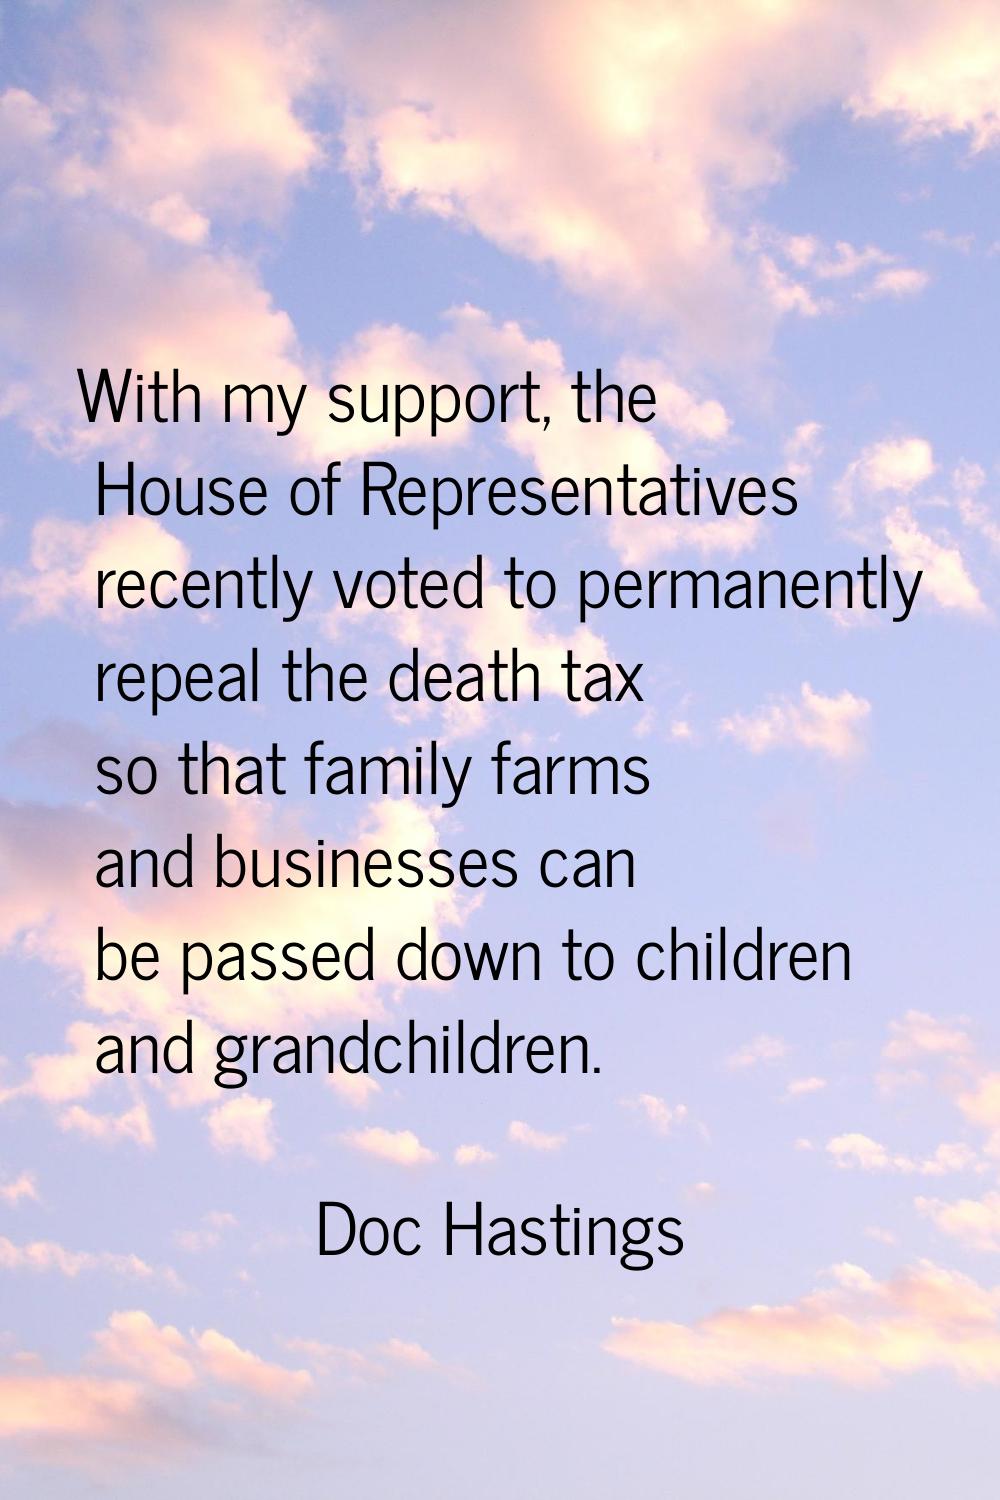 With my support, the House of Representatives recently voted to permanently repeal the death tax so